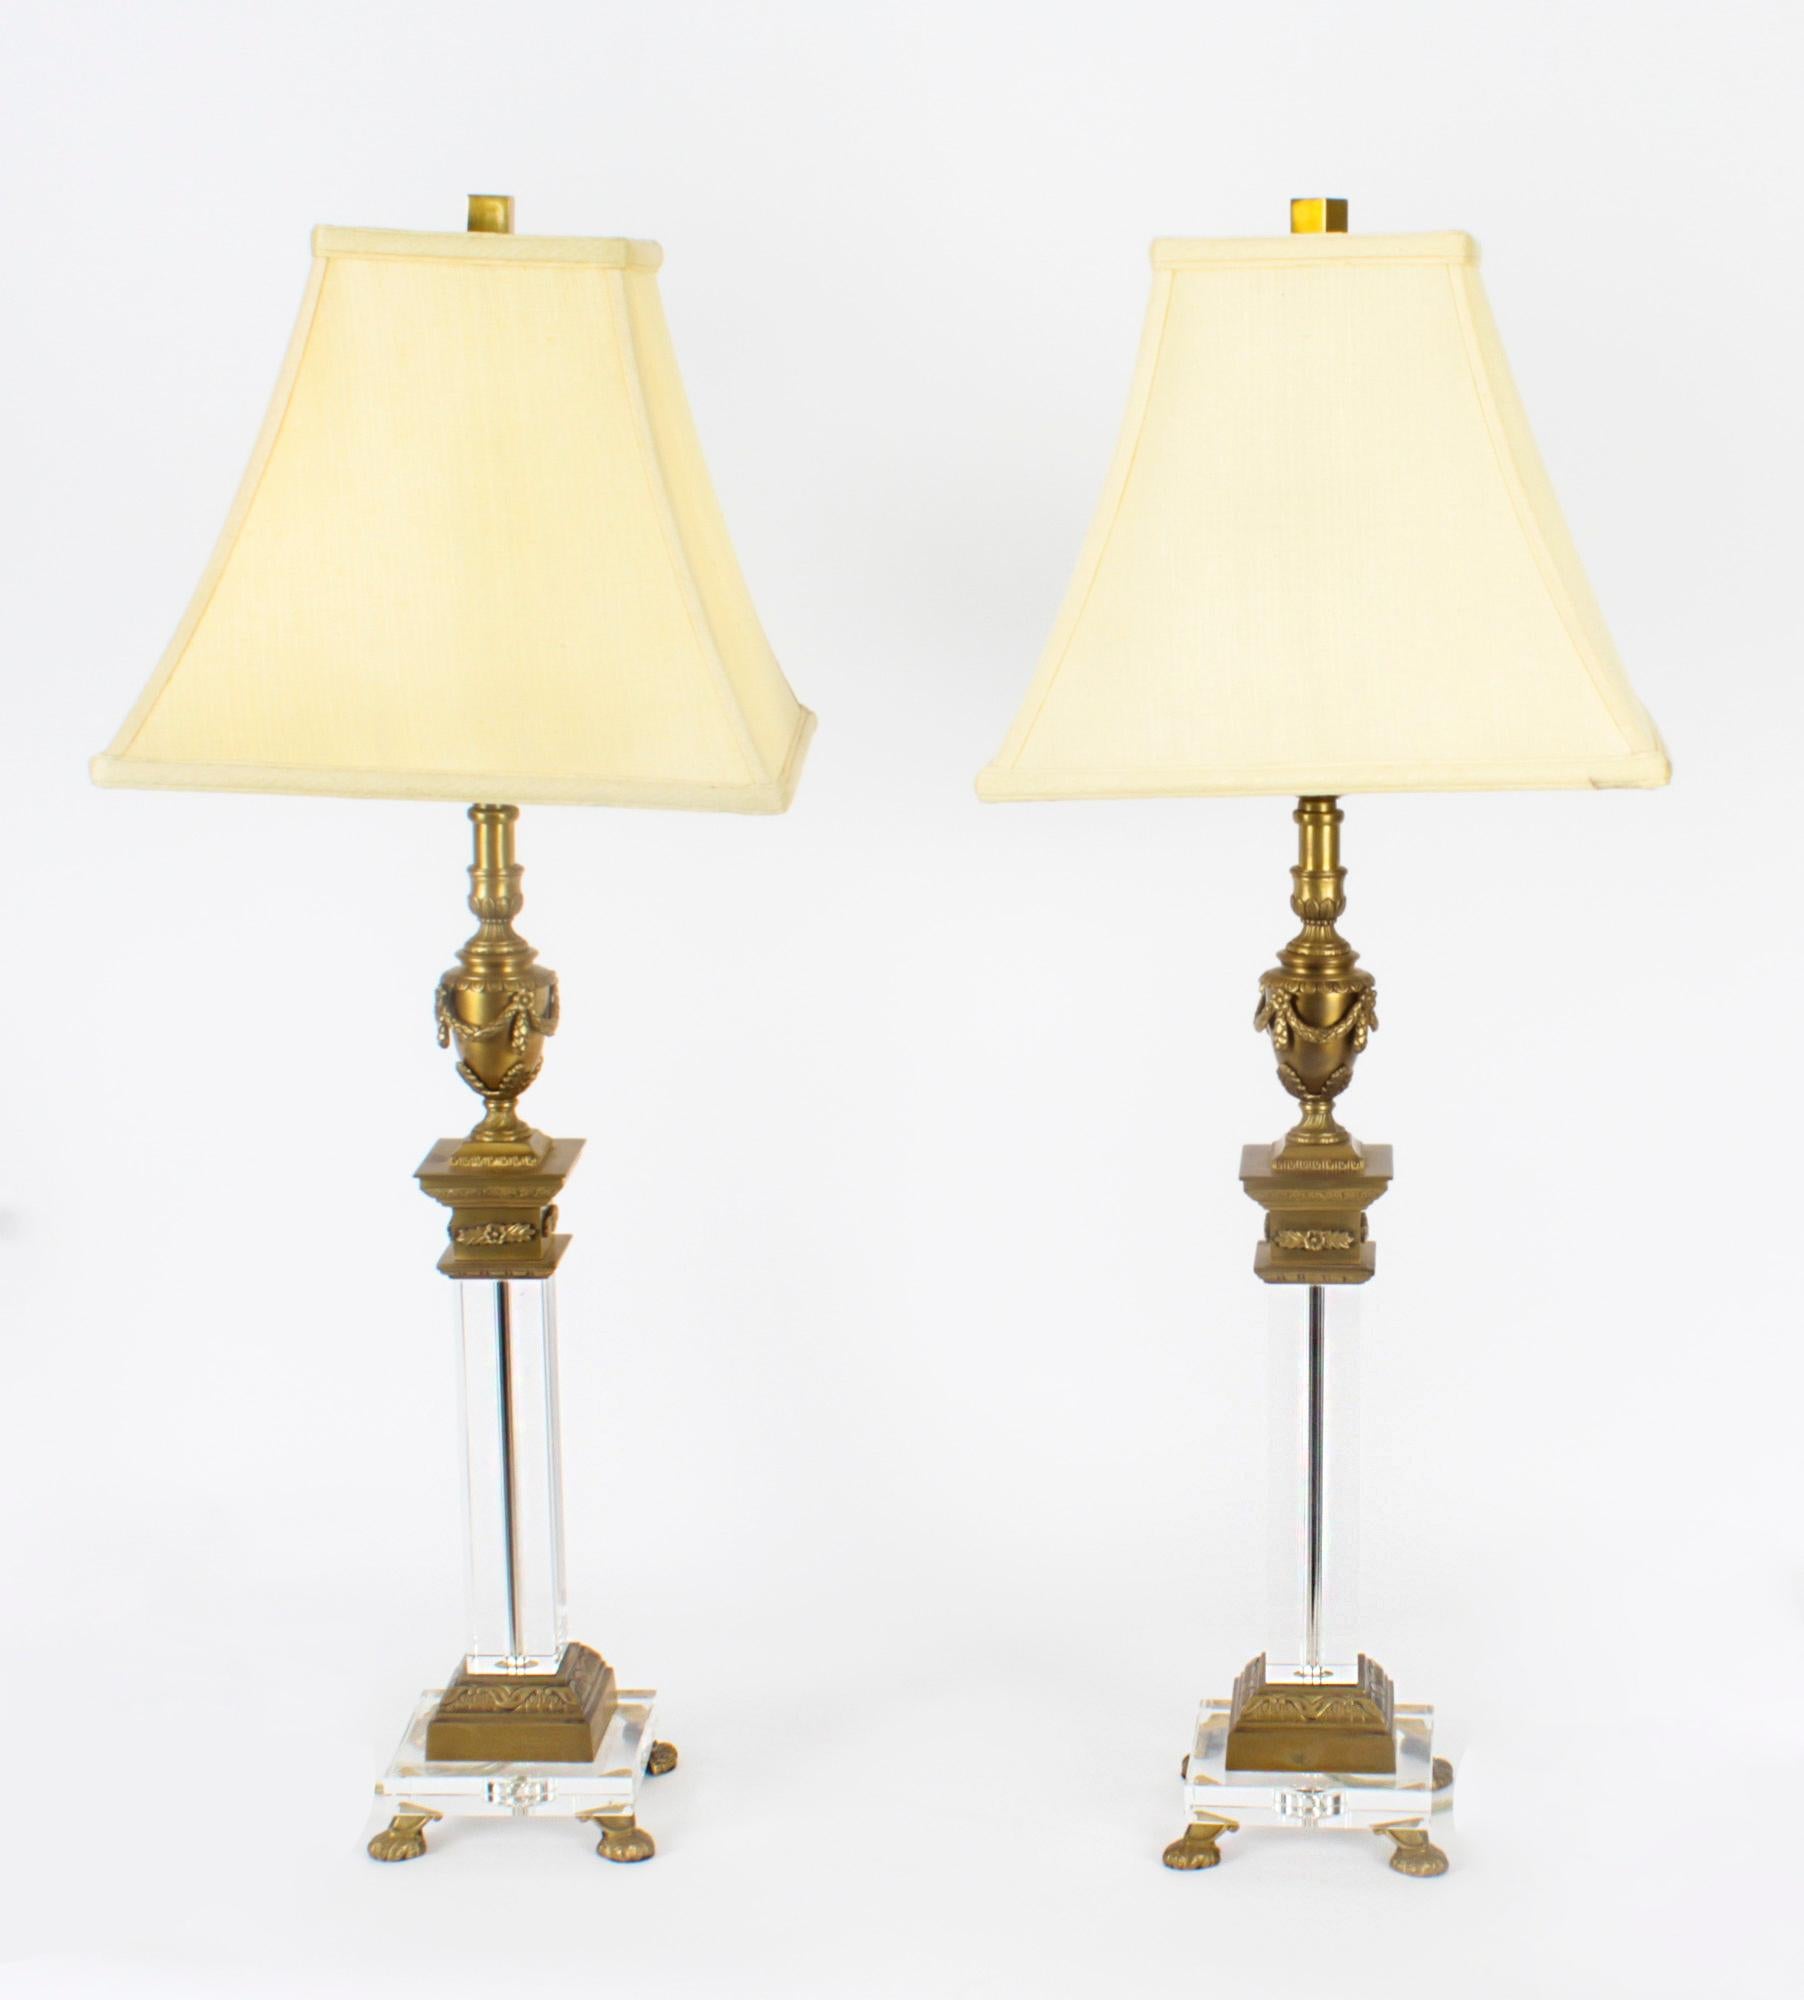 This is an impressive vintage set of four of ormolu and glass classical corinthian column & urn table lamp, circa Mid 20th Century in date.

Each lamp features a classical urn capital with swags, above a square shaped Corinthian column decorated